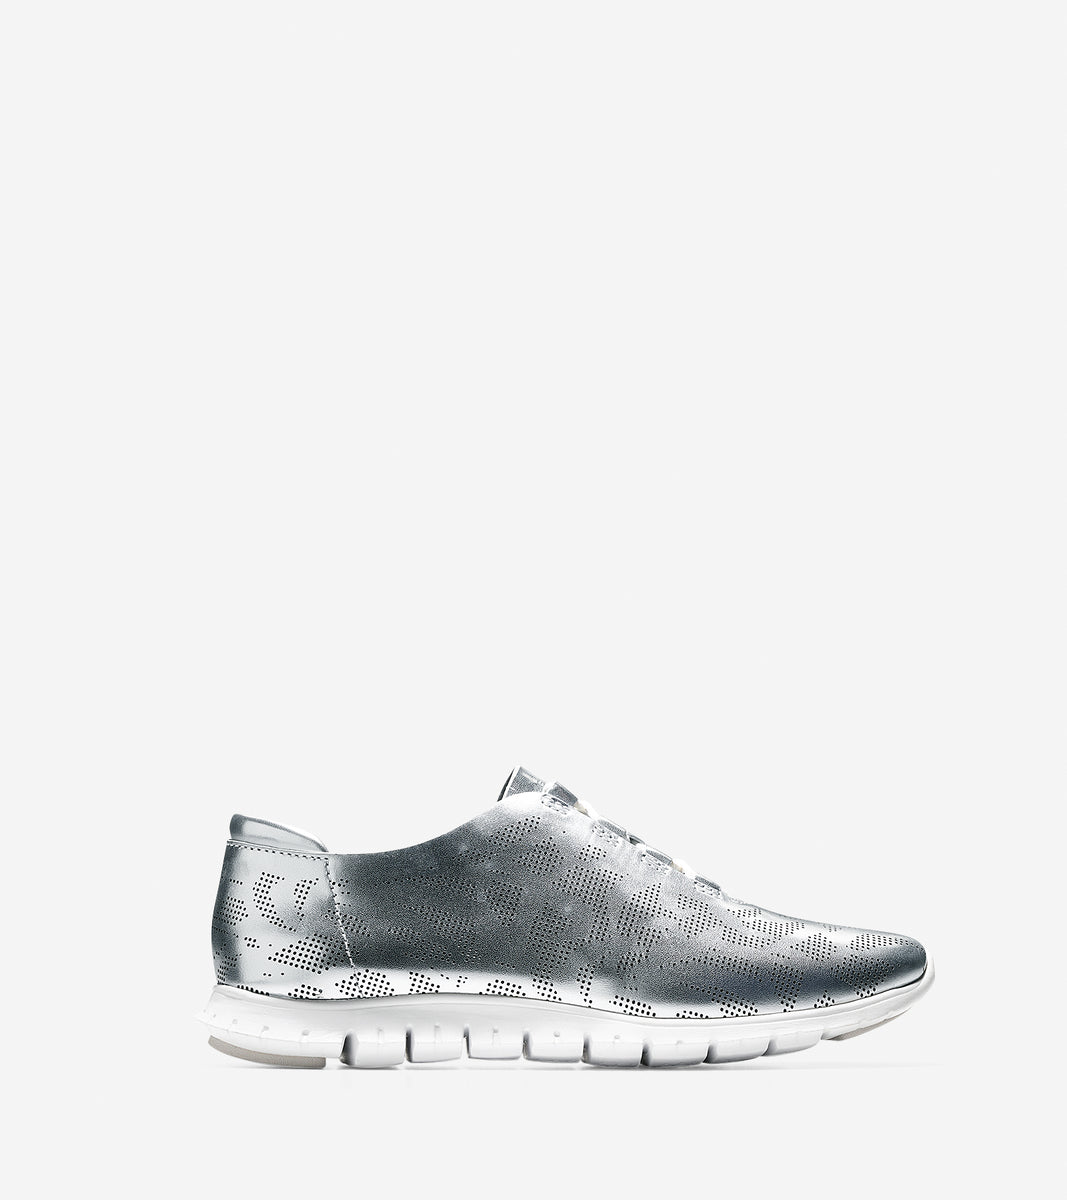 ColeHaan-ZERØGRAND Perforated Trainer-w01833-Soft Silver Perf-white